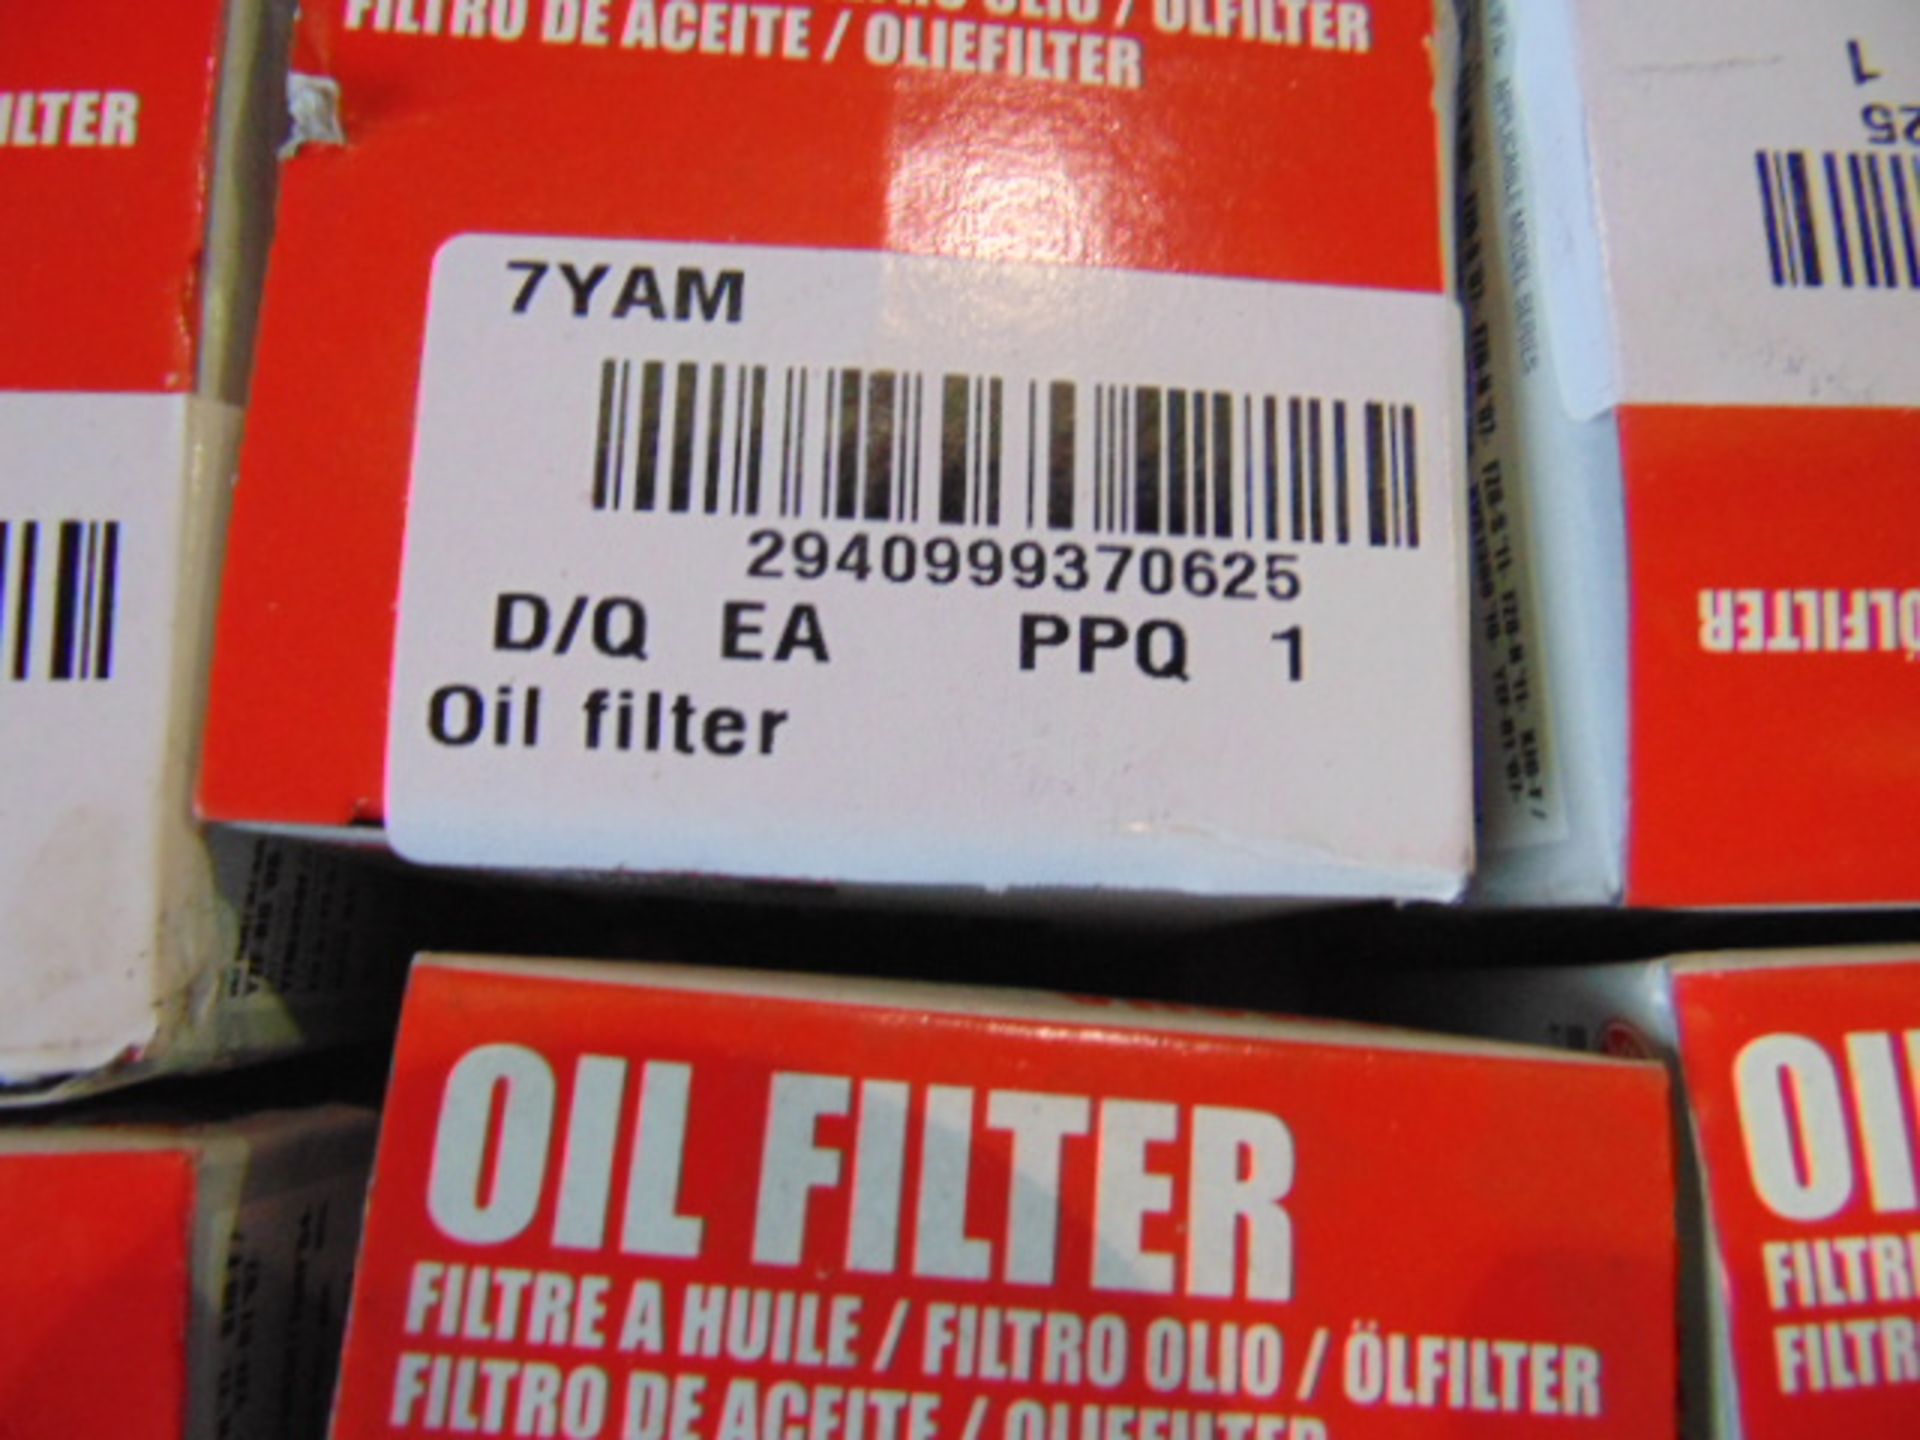 Yamaha Grizzly Maintenance Spares consisting of Spark Plugs, Filters, Belts, Lamps, Fuses Brake Pads - Image 3 of 10